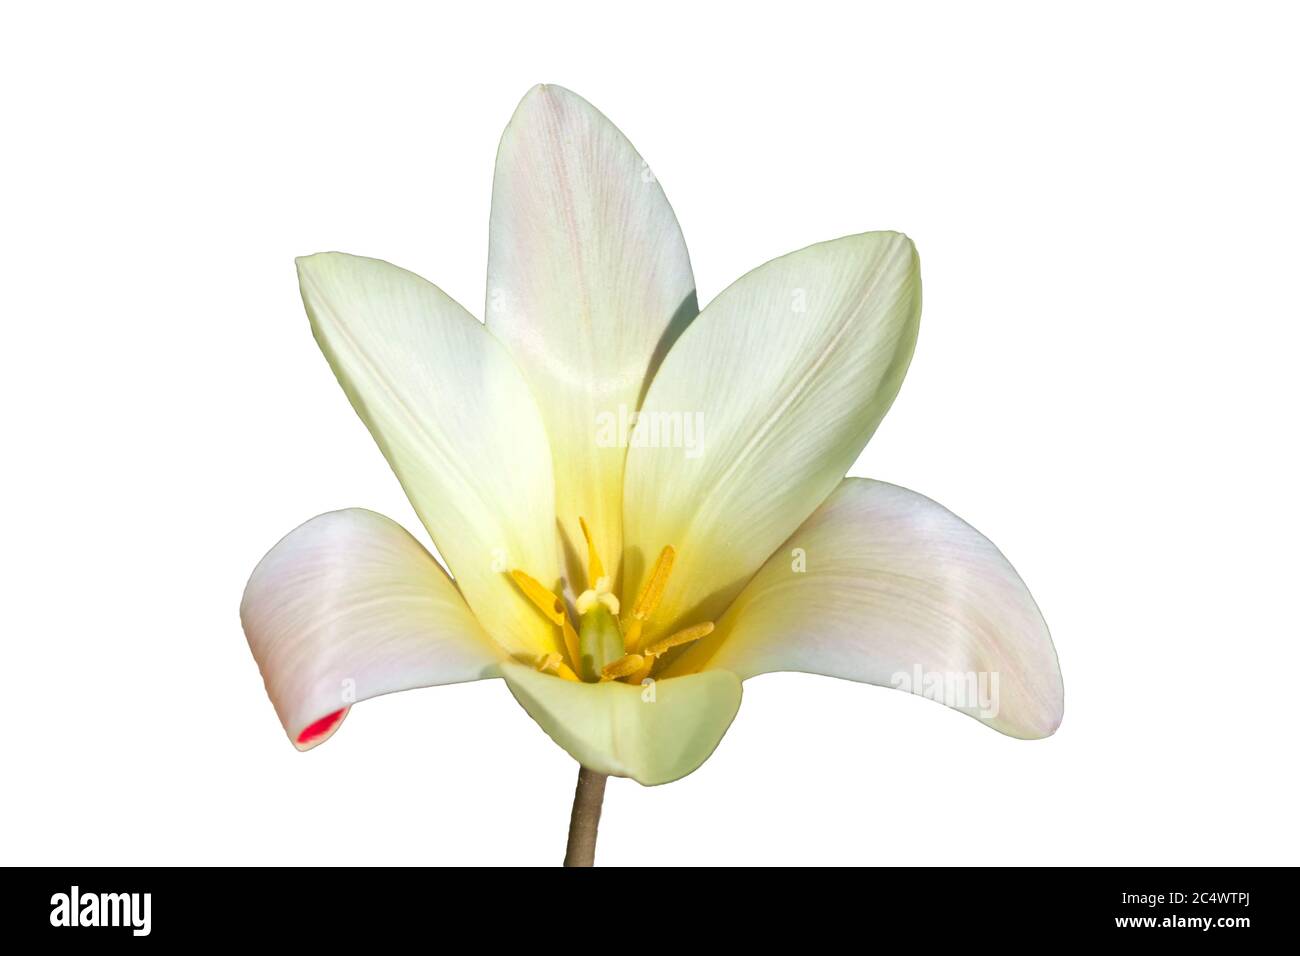 Tulip clusiana 'Tinka' a spring flowering bulb plant cut out and isolated on a white background Stock Photo